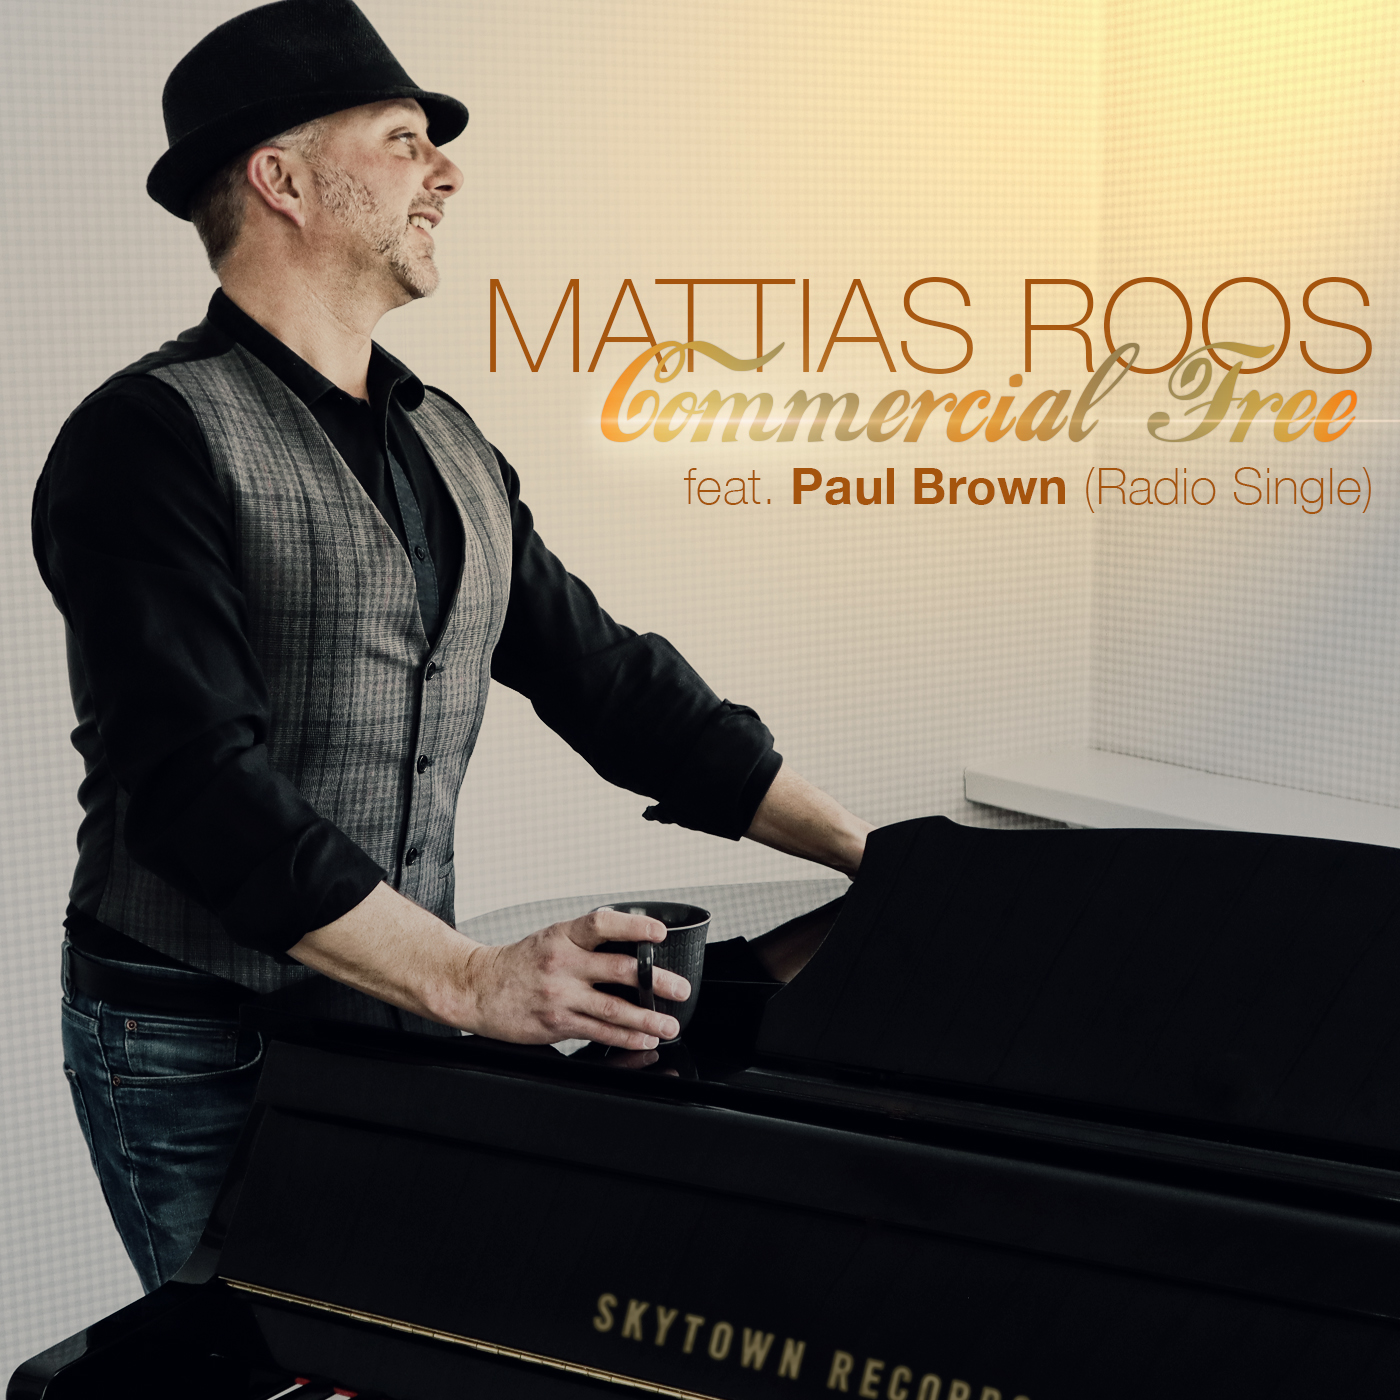 Art for Commercial Free feat. Paul Brown by Mattias Roos